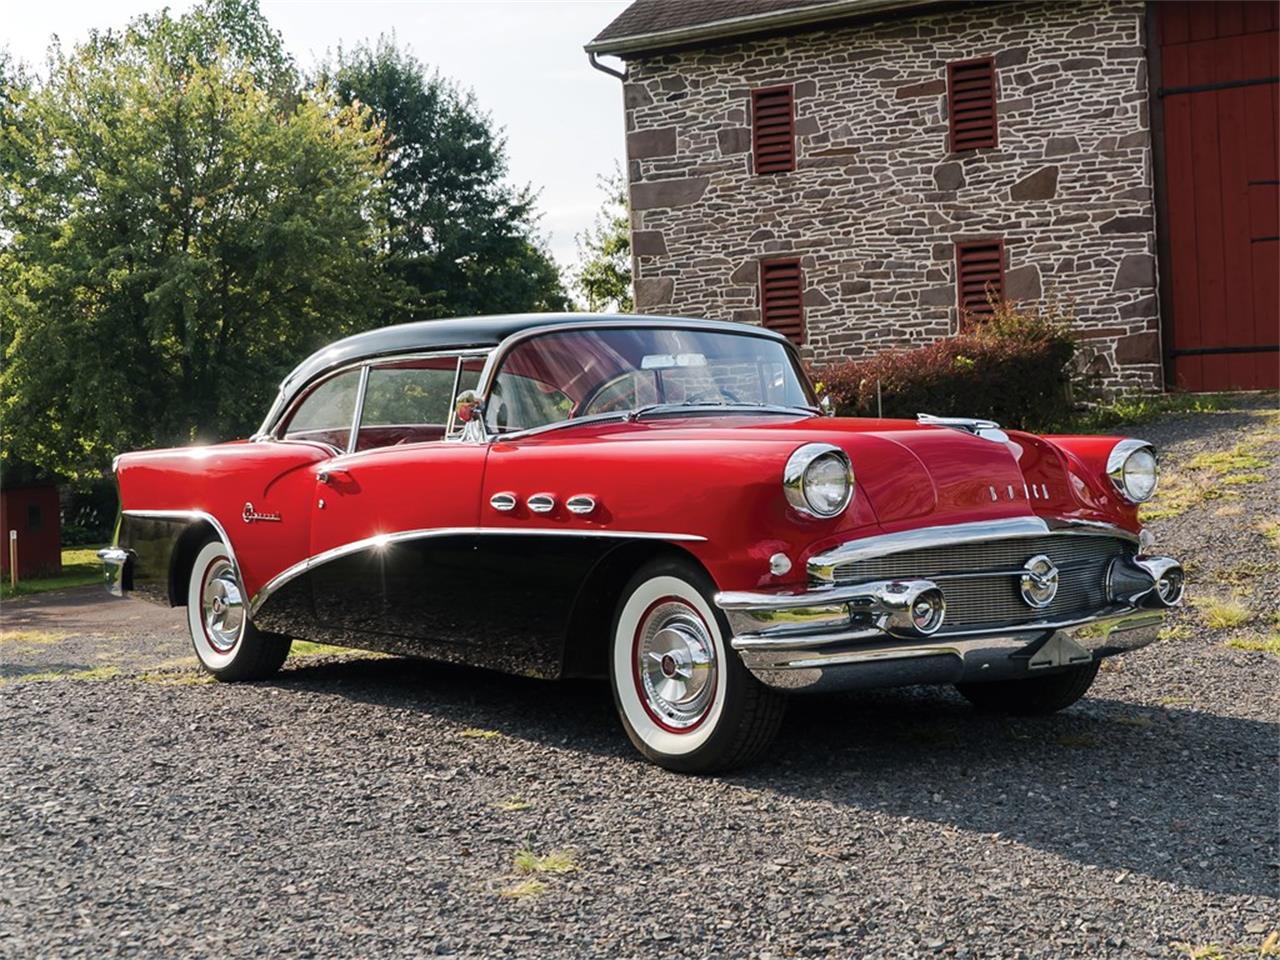 1956 buick special riviera for sale classiccars com cc 1264743 1956 buick special riviera for sale